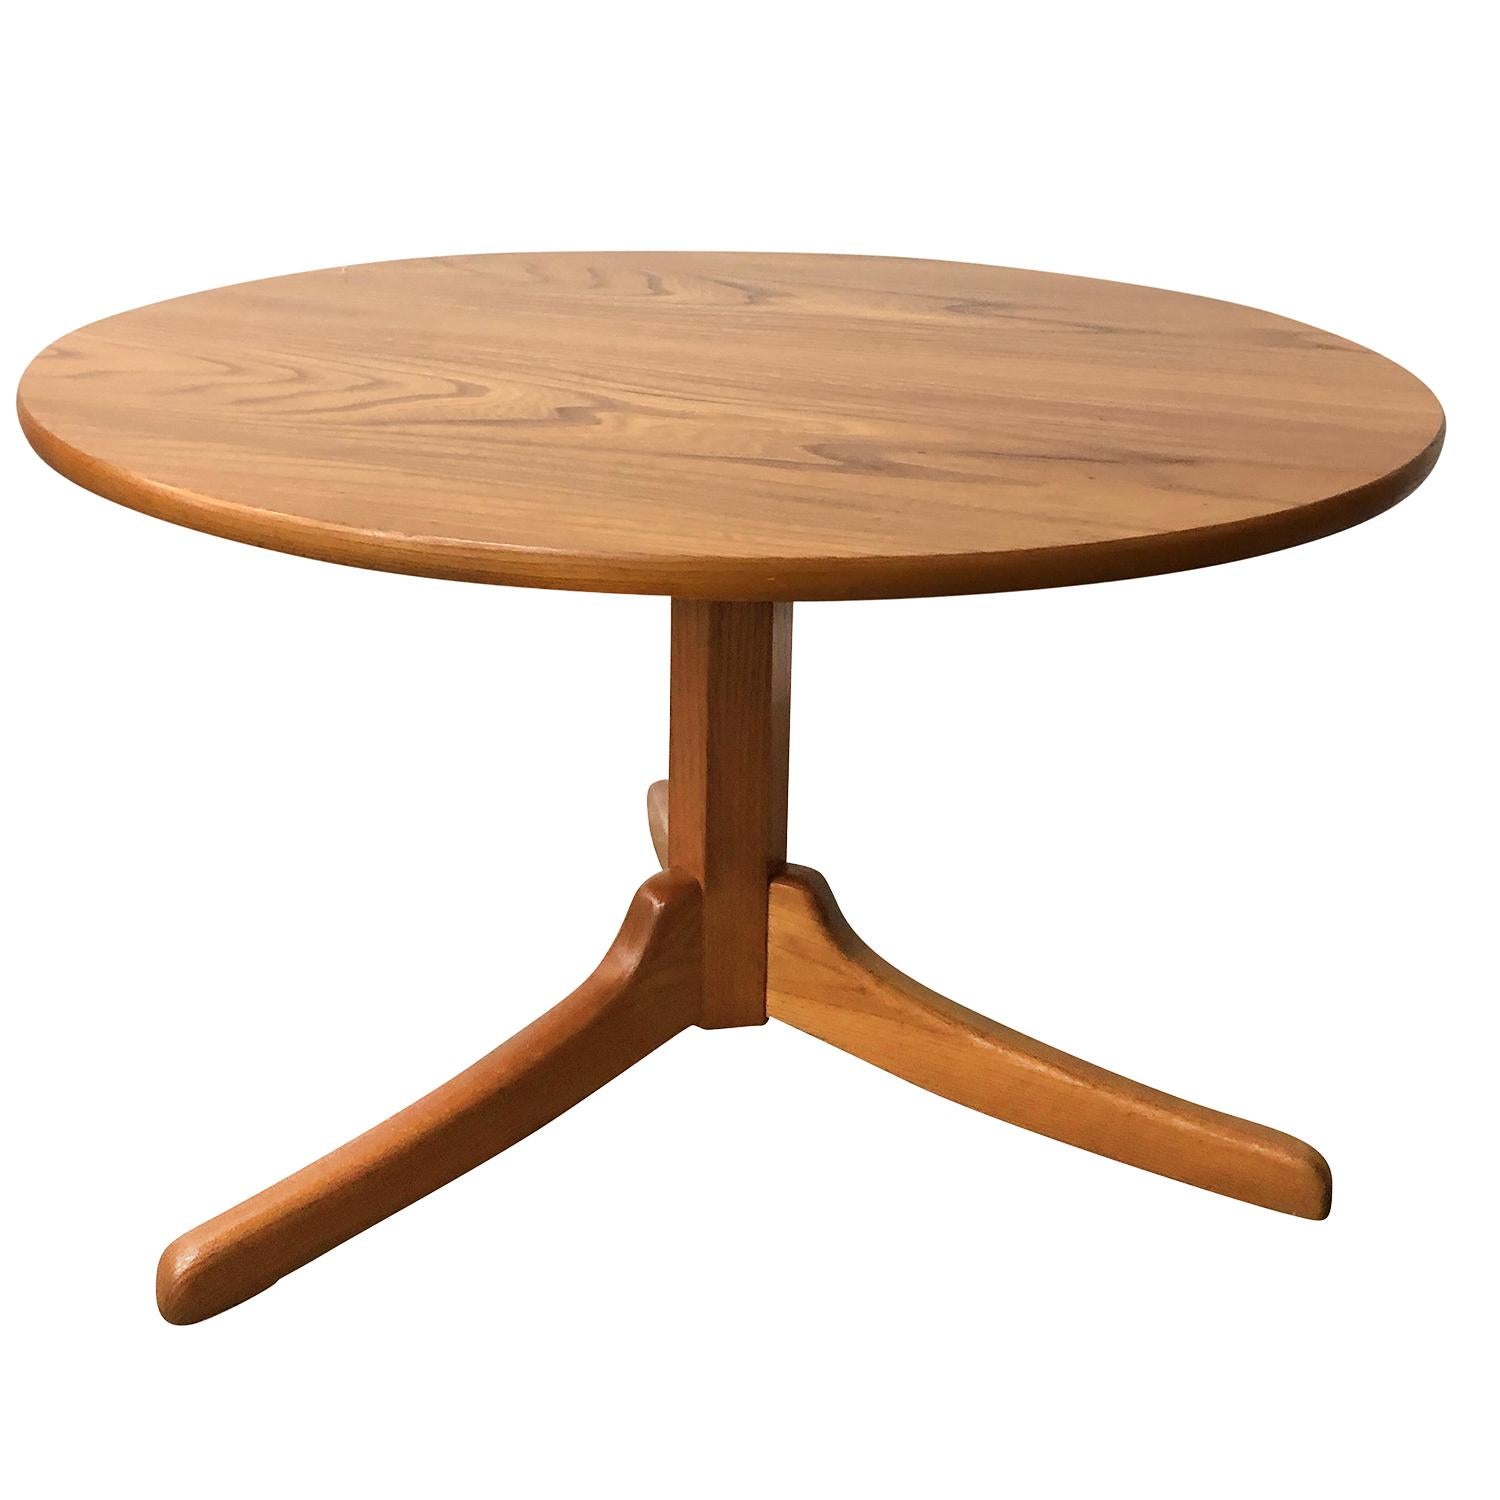 A light-brown, vintage Mid-Century Modern Swedish gueridon table with a round top. Designed by Josef Frank and produced by Svenskt Tenn, Modell 560. Shellac polished, beautiful bird's-eye of Maplewood on three legs, in good condition. Wear